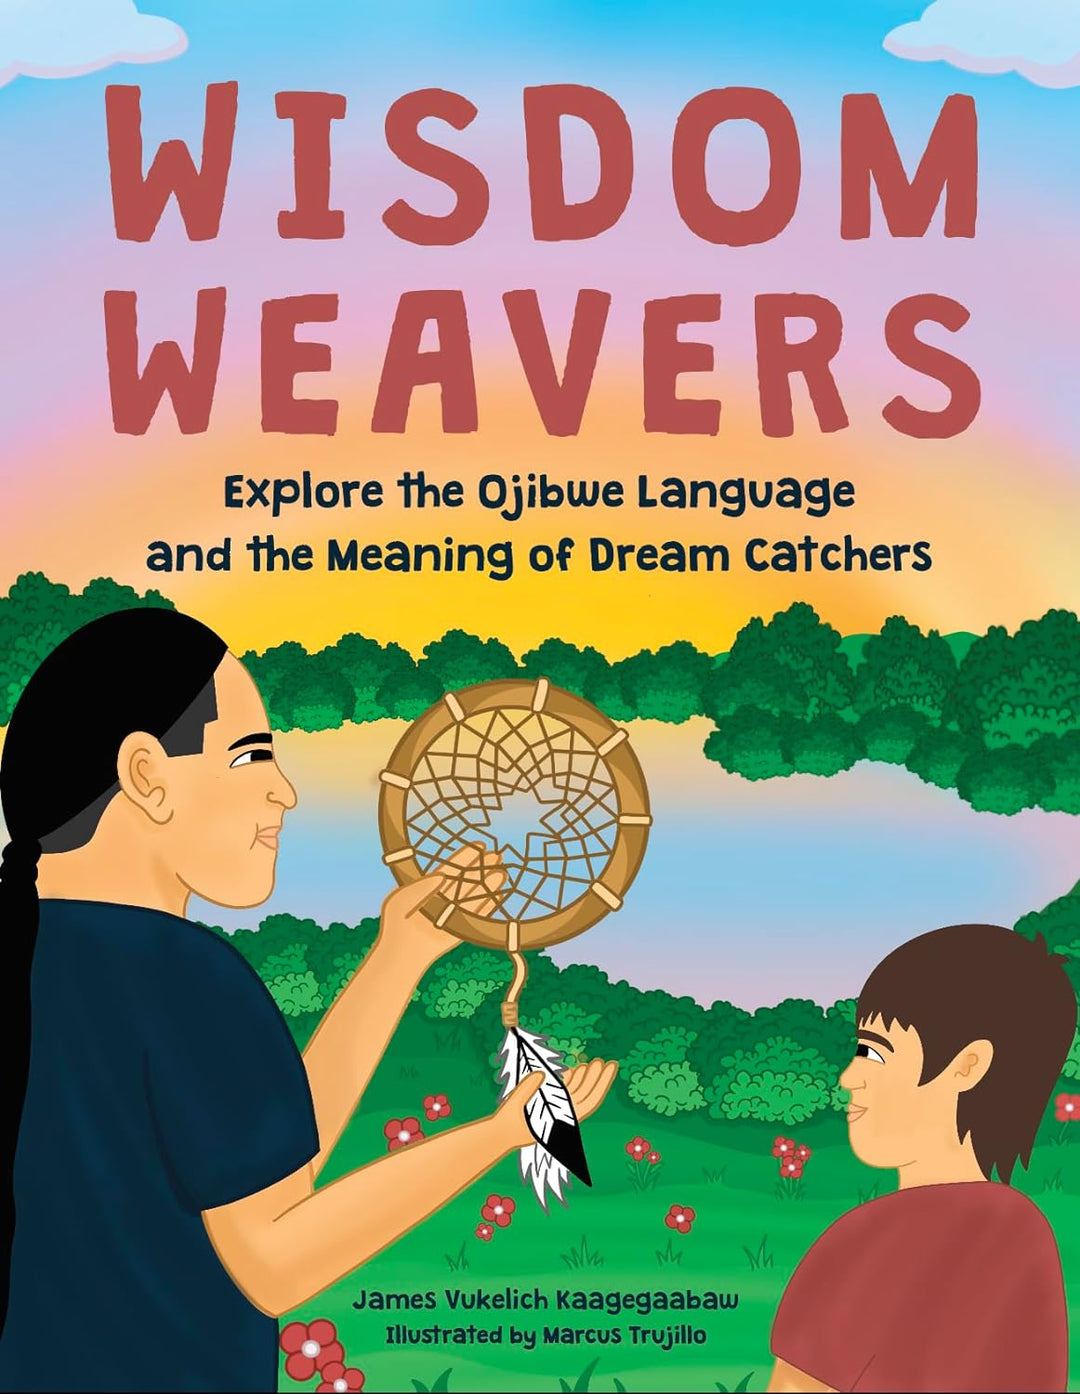 Wisdom Weavers: Explore the Ojibwe Language and the Meaning of Dream Catchers by James Vukelich Kaagegaabaw